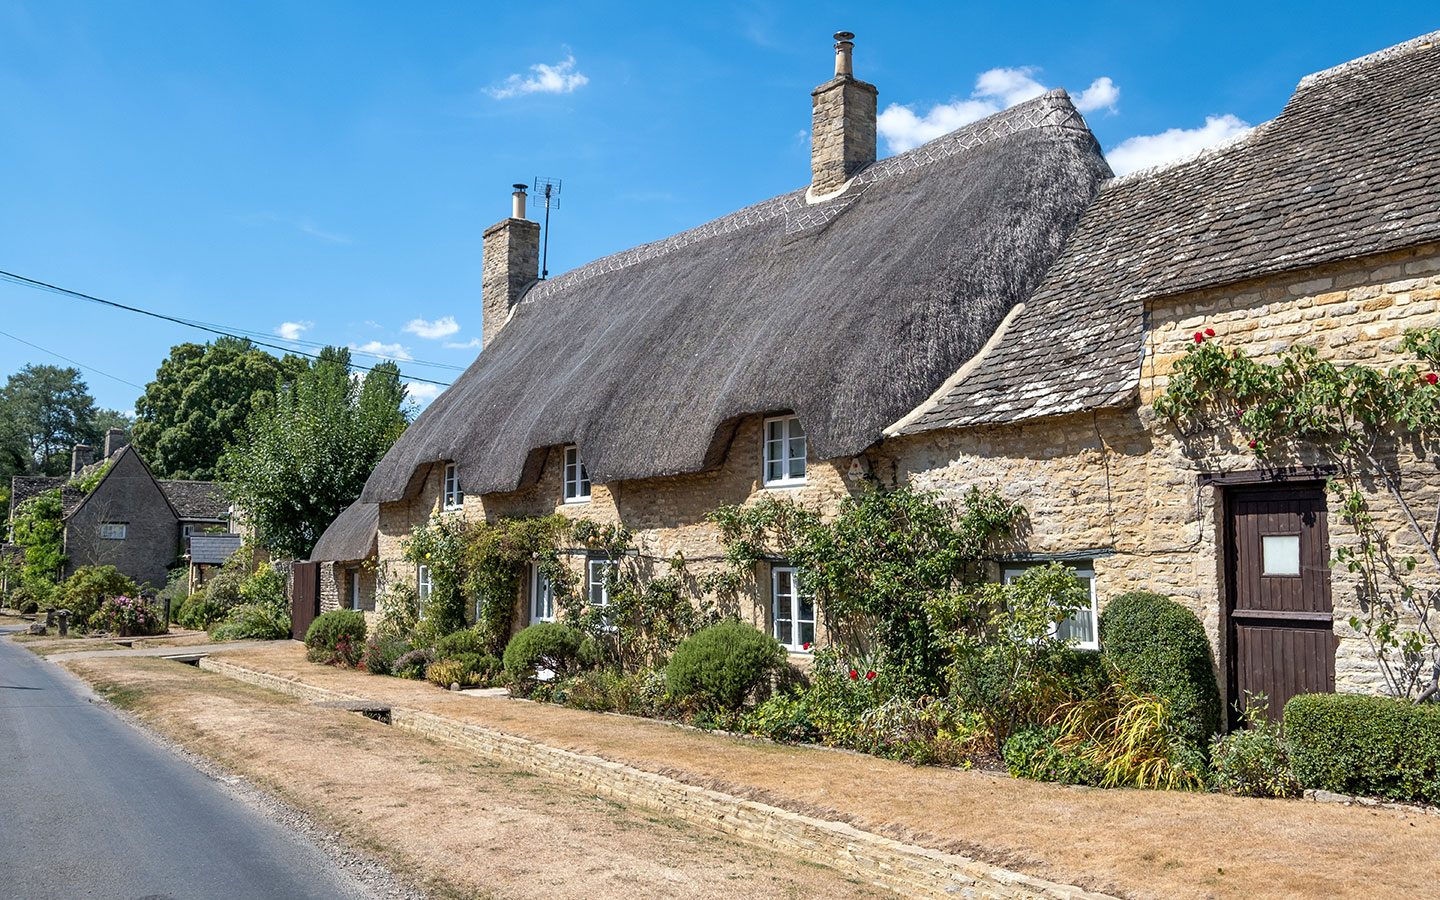 Thatched cottage in Minster Lovell village in the Cotswolds